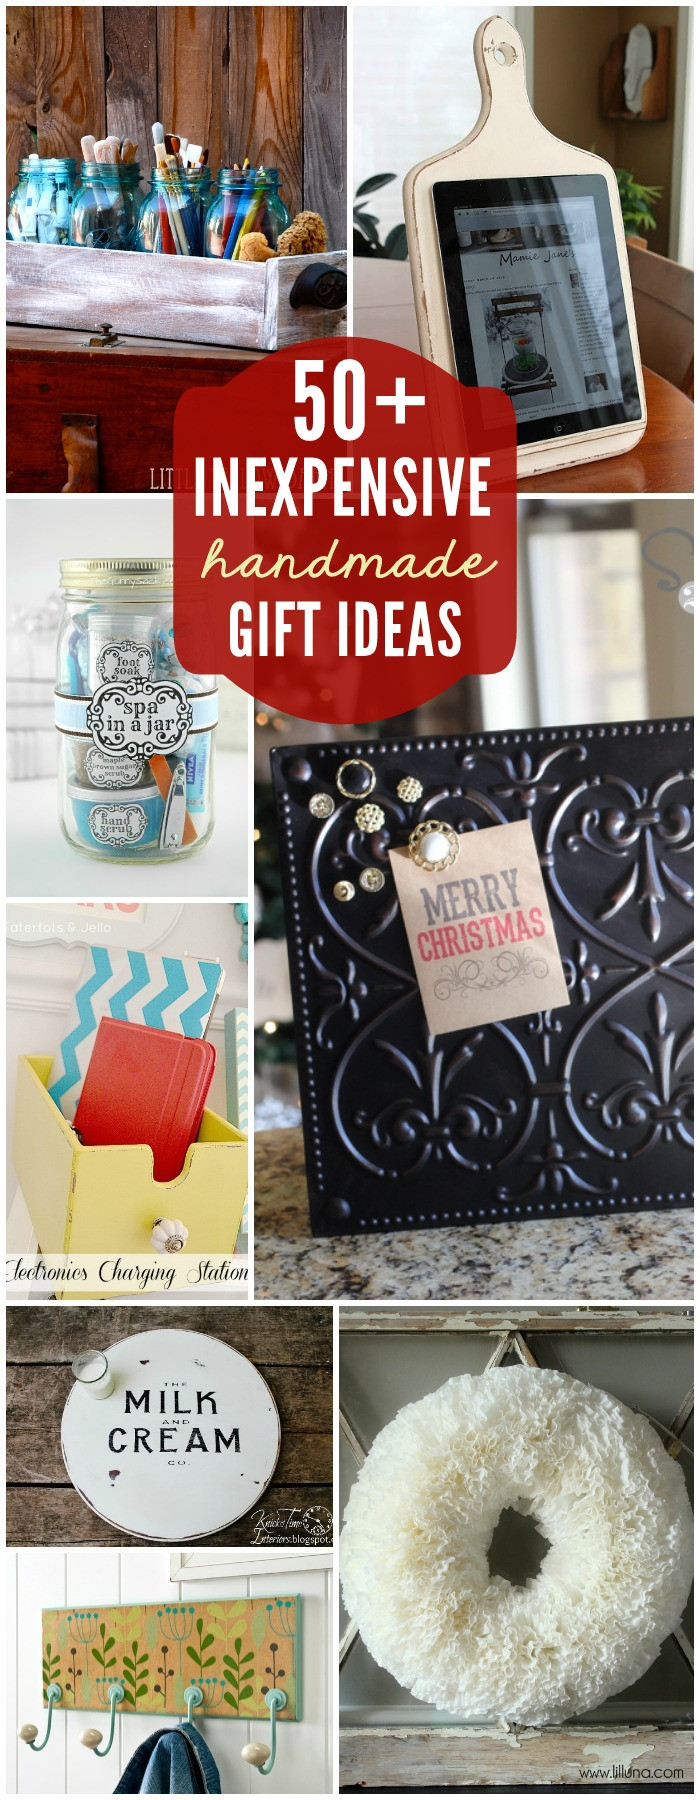 Best ideas about Easy DIY Gifts
. Save or Pin Easy DIY Gift Ideas Now.